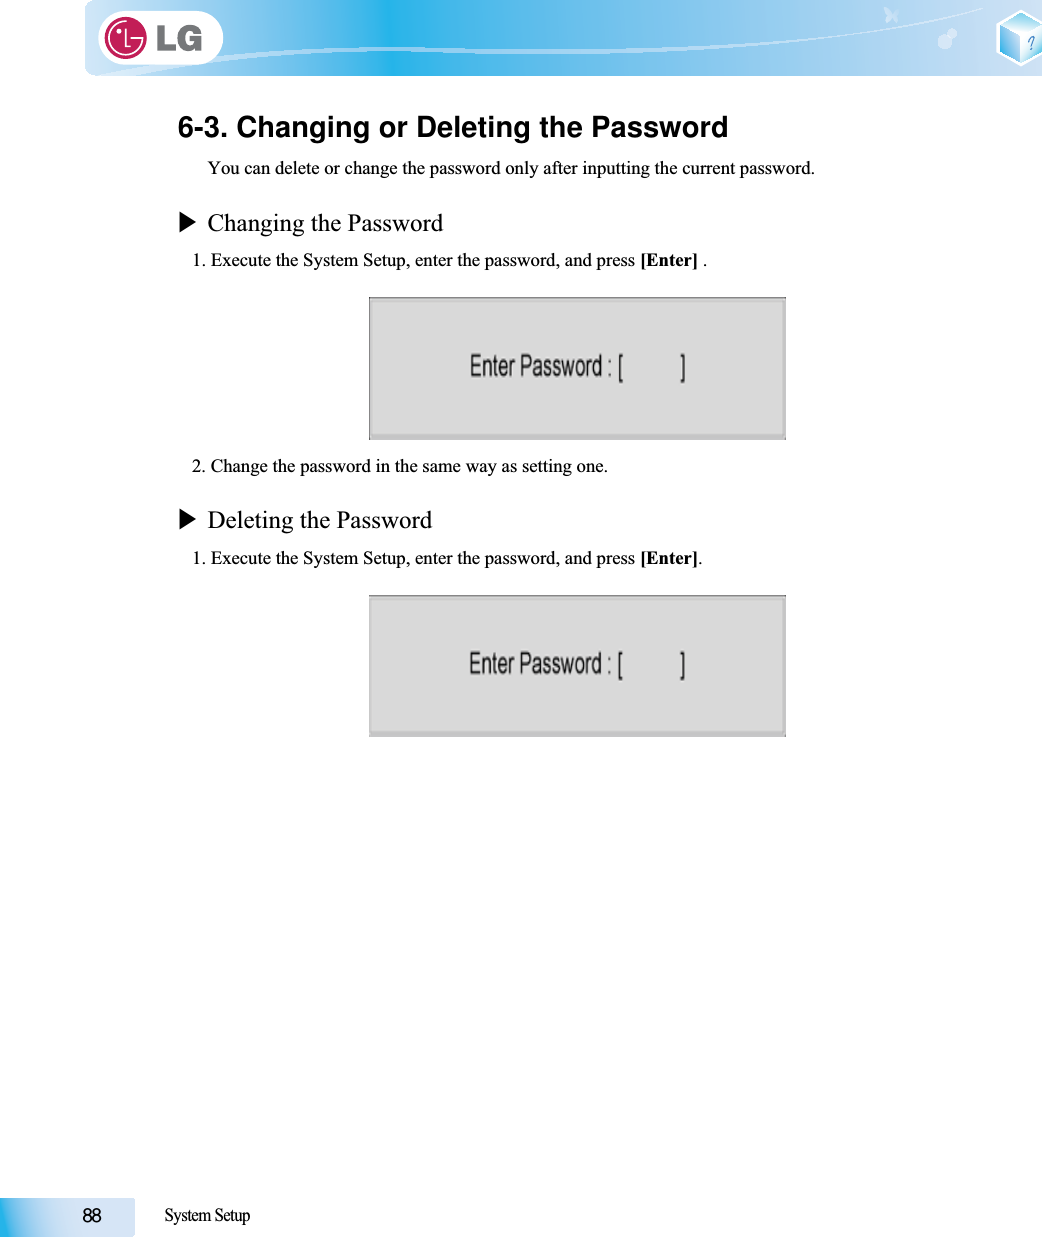 System Setup6-3. Changing or Deleting the PasswordYou can delete or change the password only after inputting the current password.XChanging the Password1. Execute the System Setup, enter the password, and press [Enter] .2. Change the password in the same way as setting one.XDeleting the Password1. Execute the System Setup, enter the password, and press [Enter].